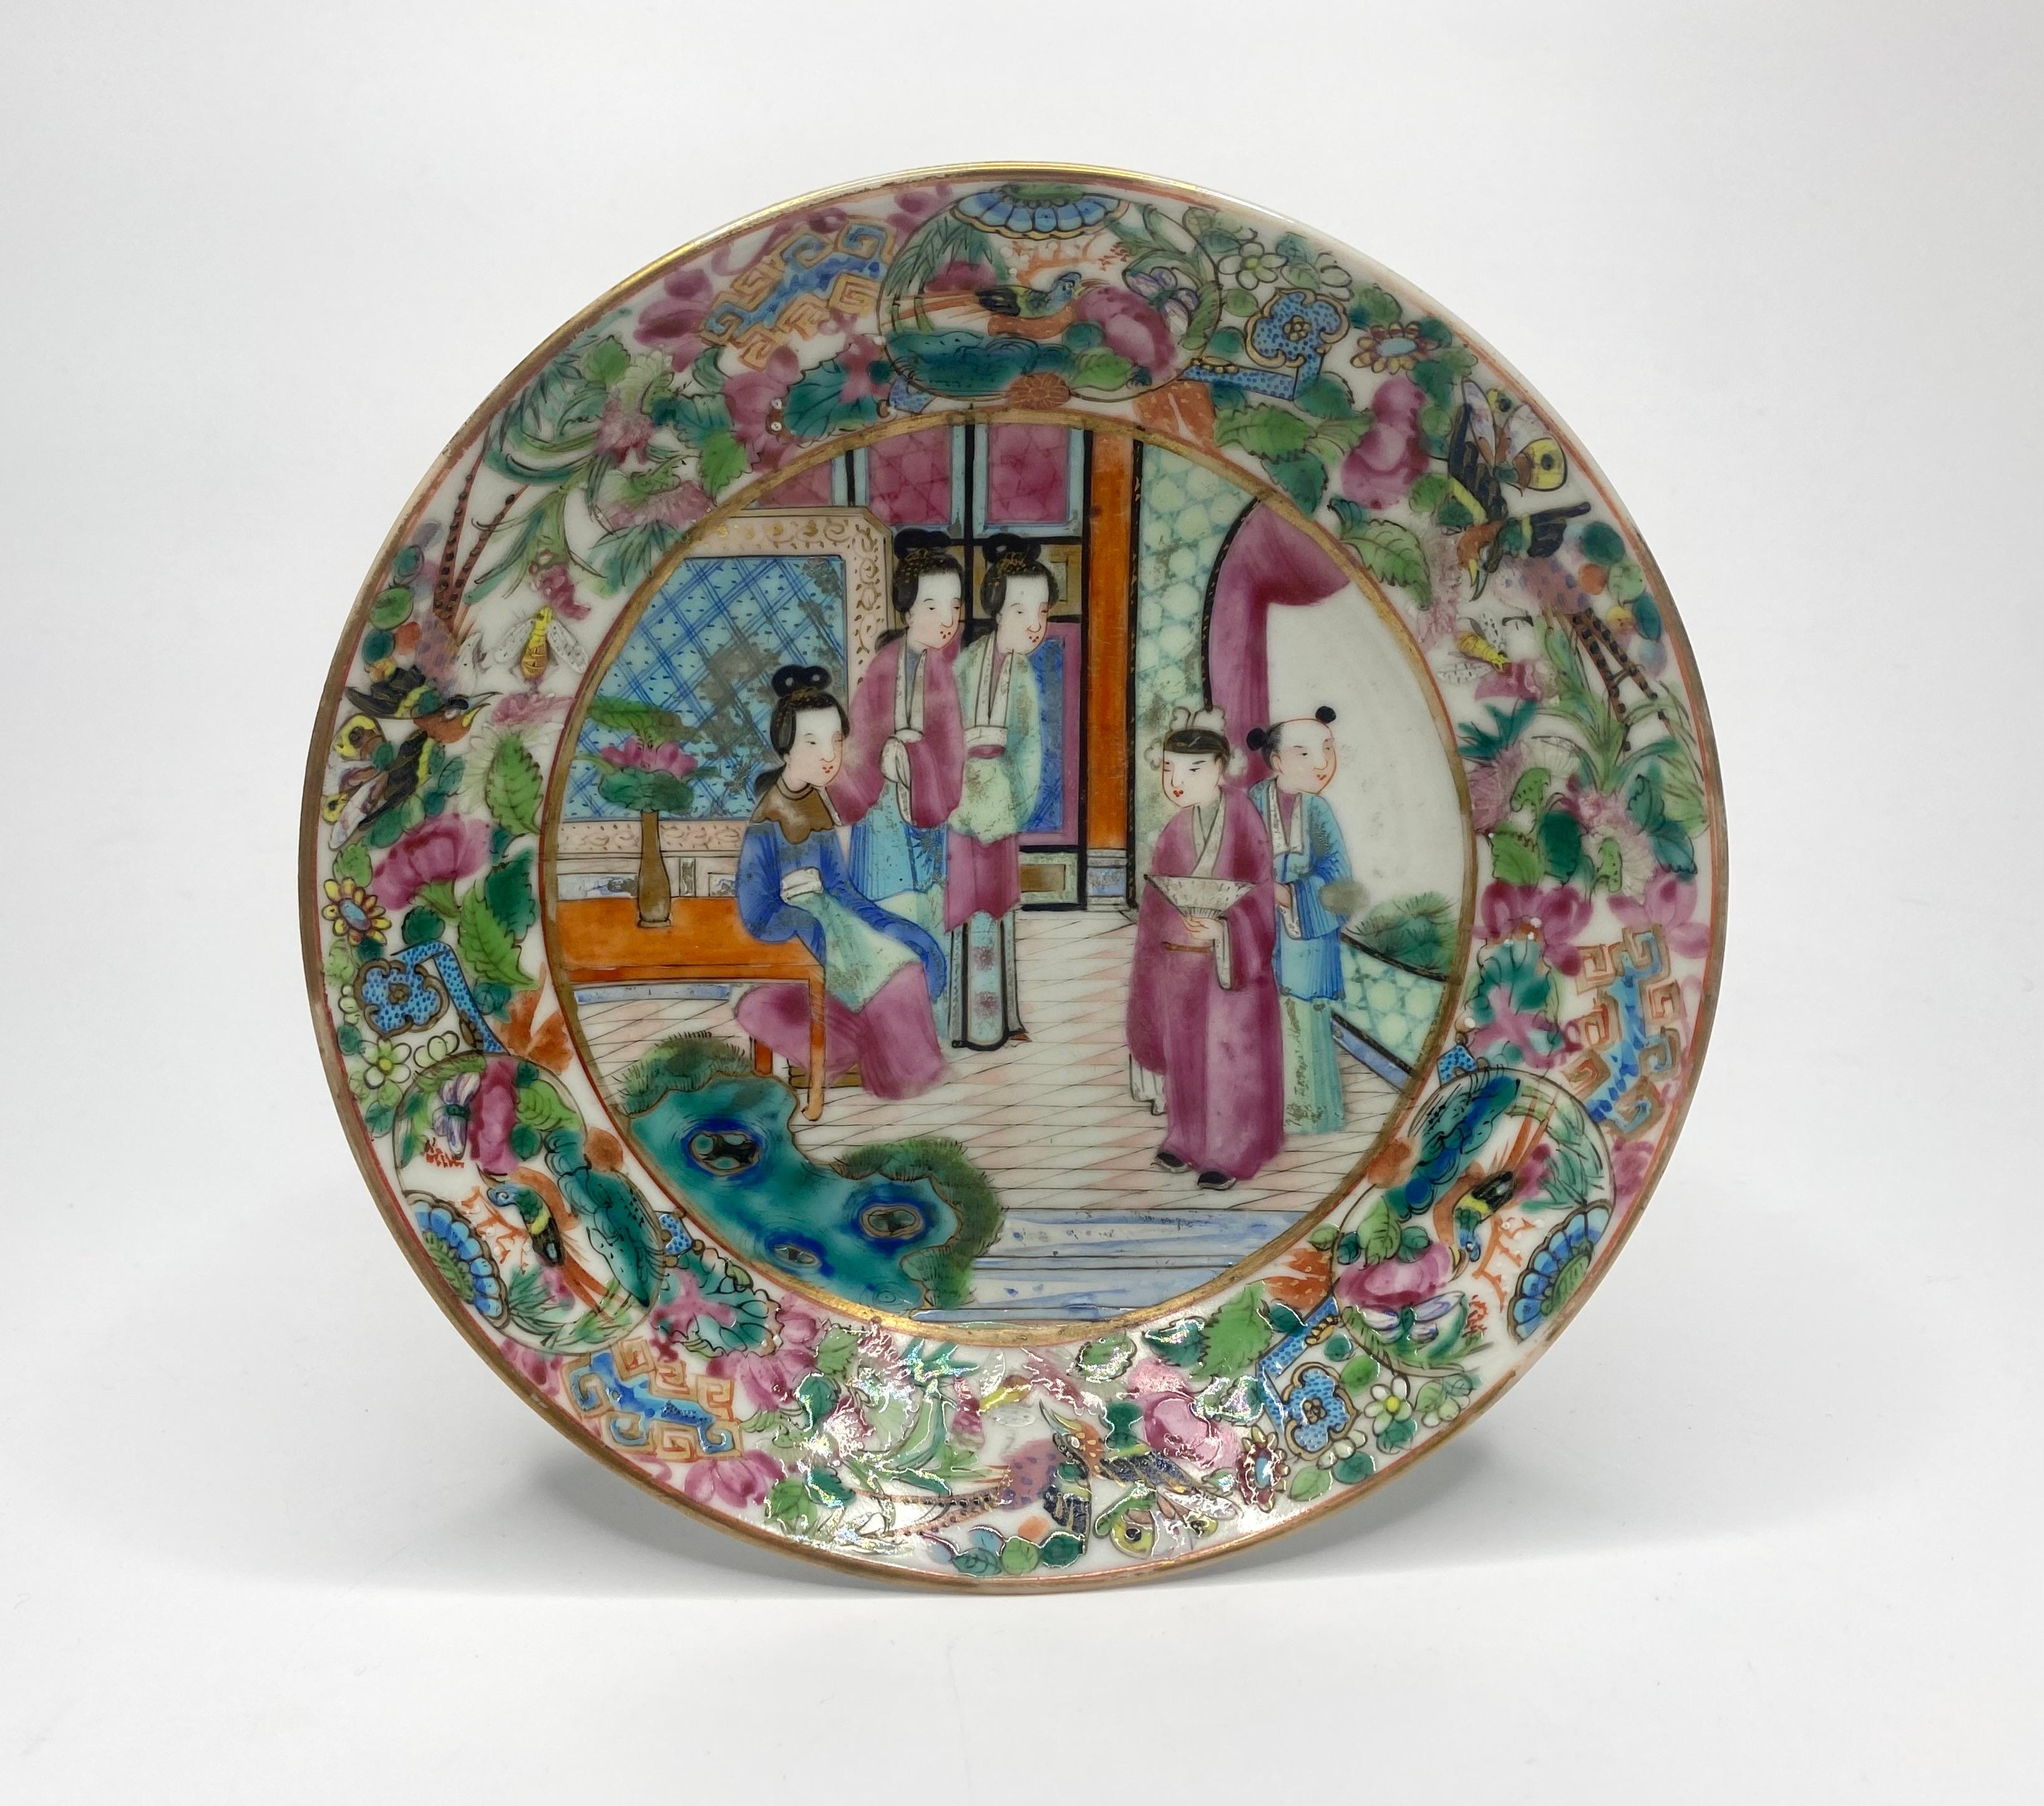 Chinese porcelain Cantonese cup and saucer, c. 1850, Qing Period. The large ‘London shape’ cup, finely hand painted in the Cantonese style, with a continuous scene of figures in a garden setting, in famille rose enamels. Internally painted with a